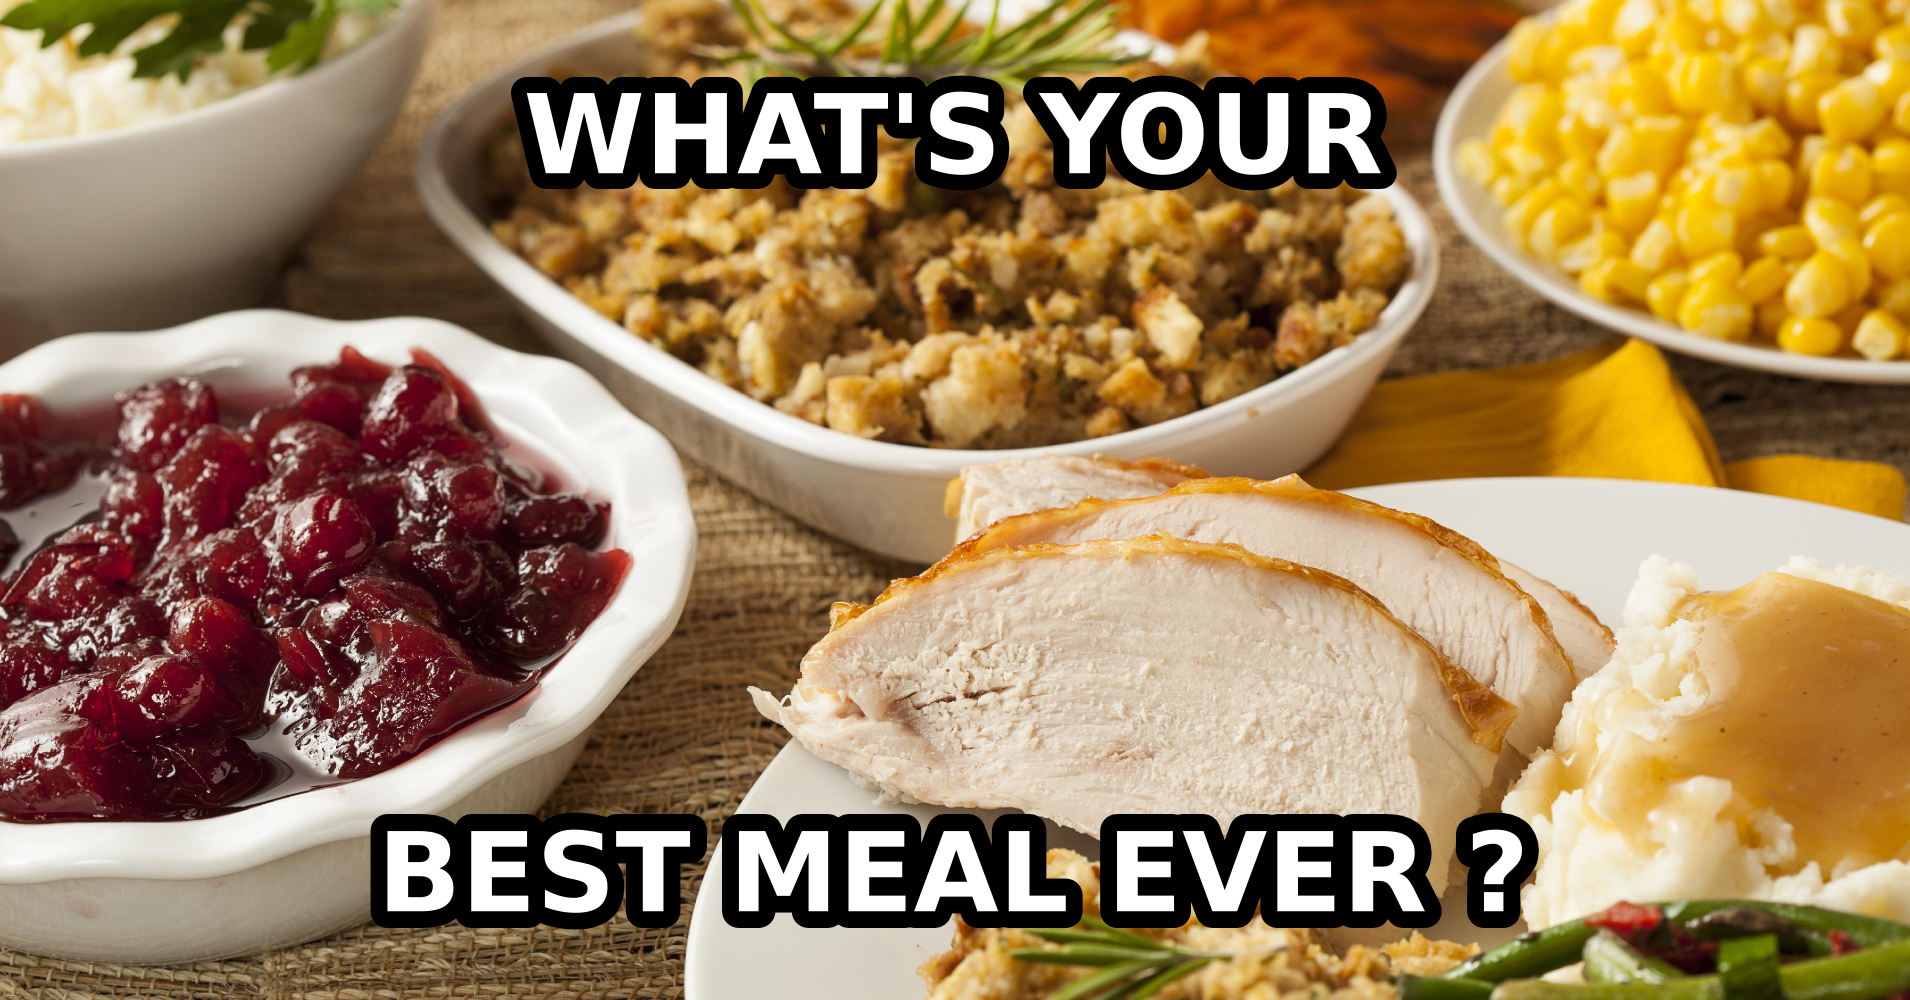 What Is Your Best Meal Ever? Question 4 - If you had to choose one of ...